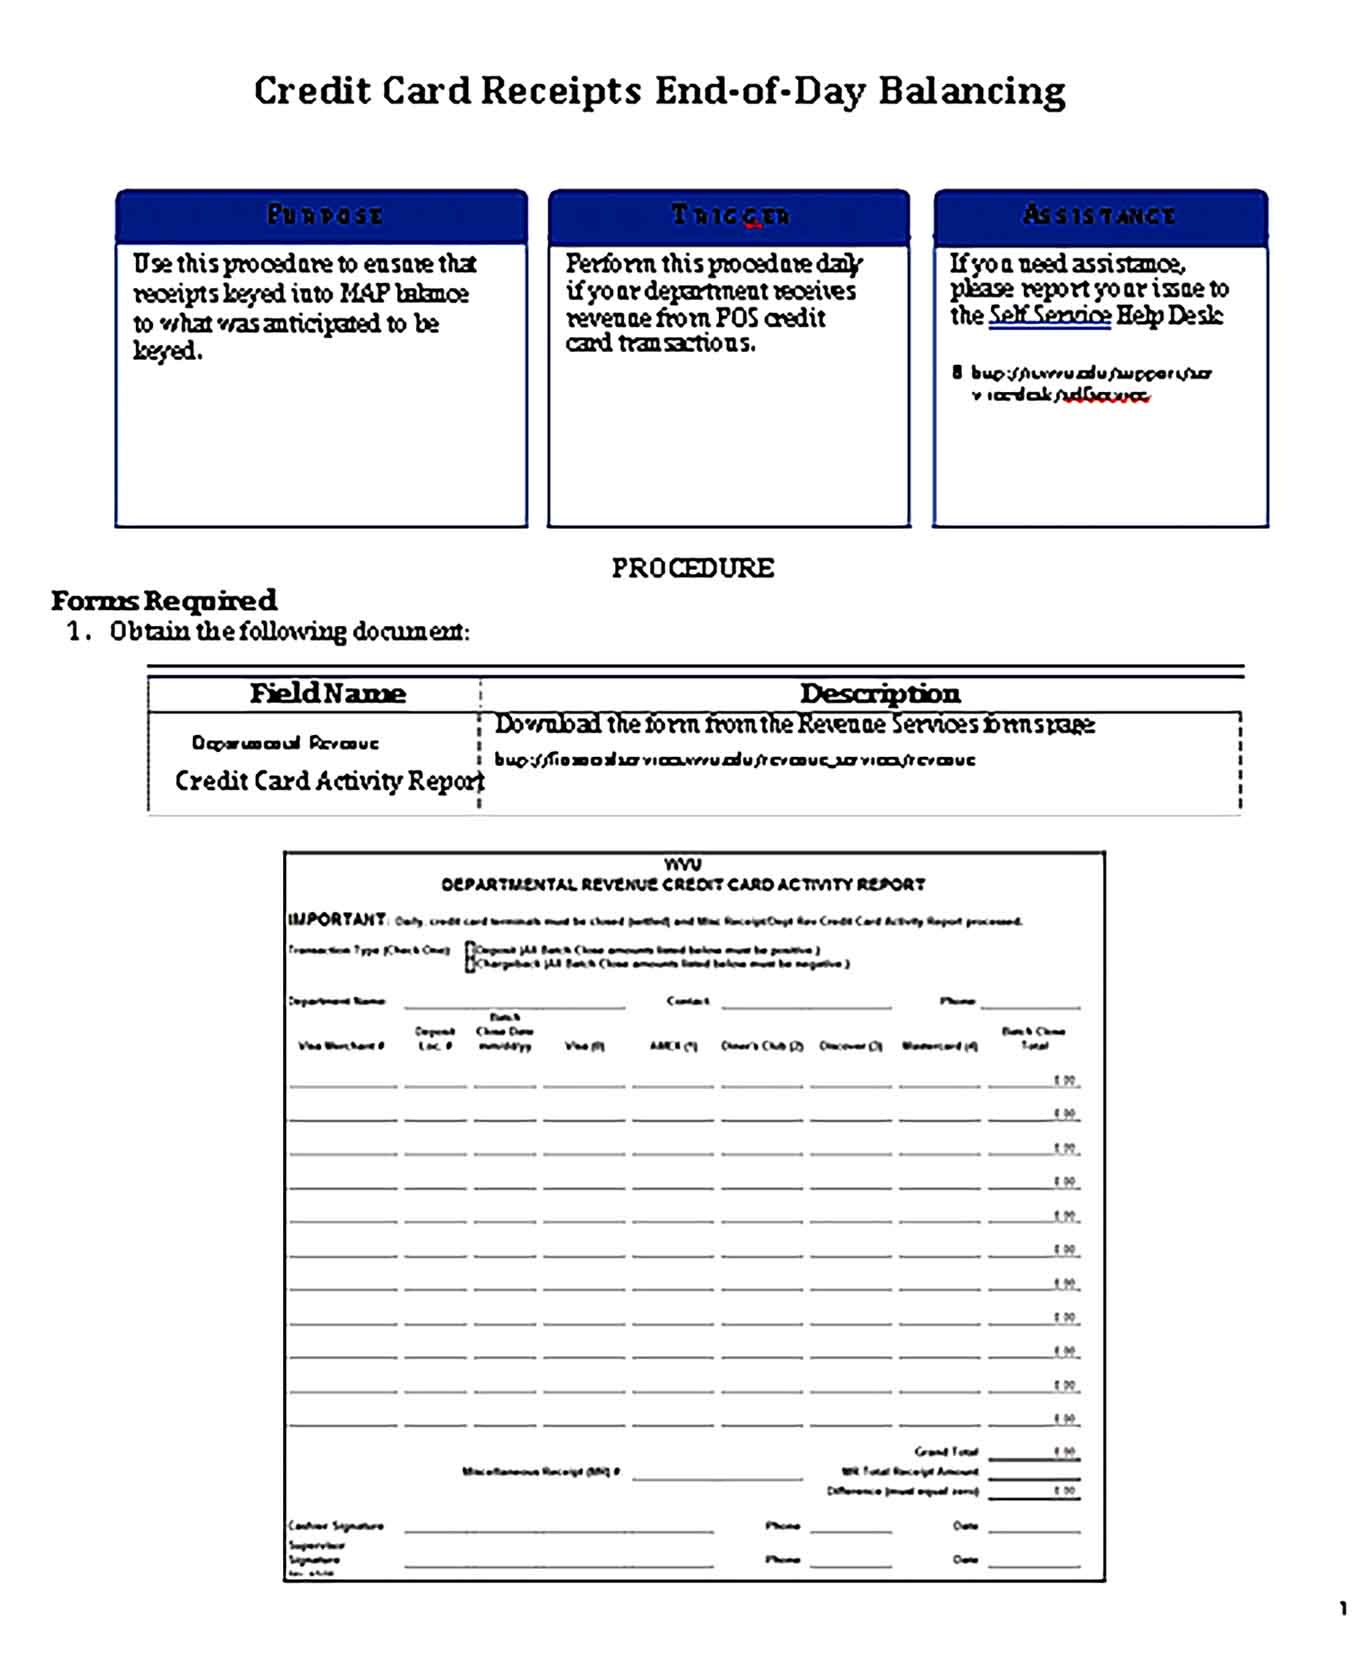 Sample End of Day Credit Card Receipt Form Templates 1